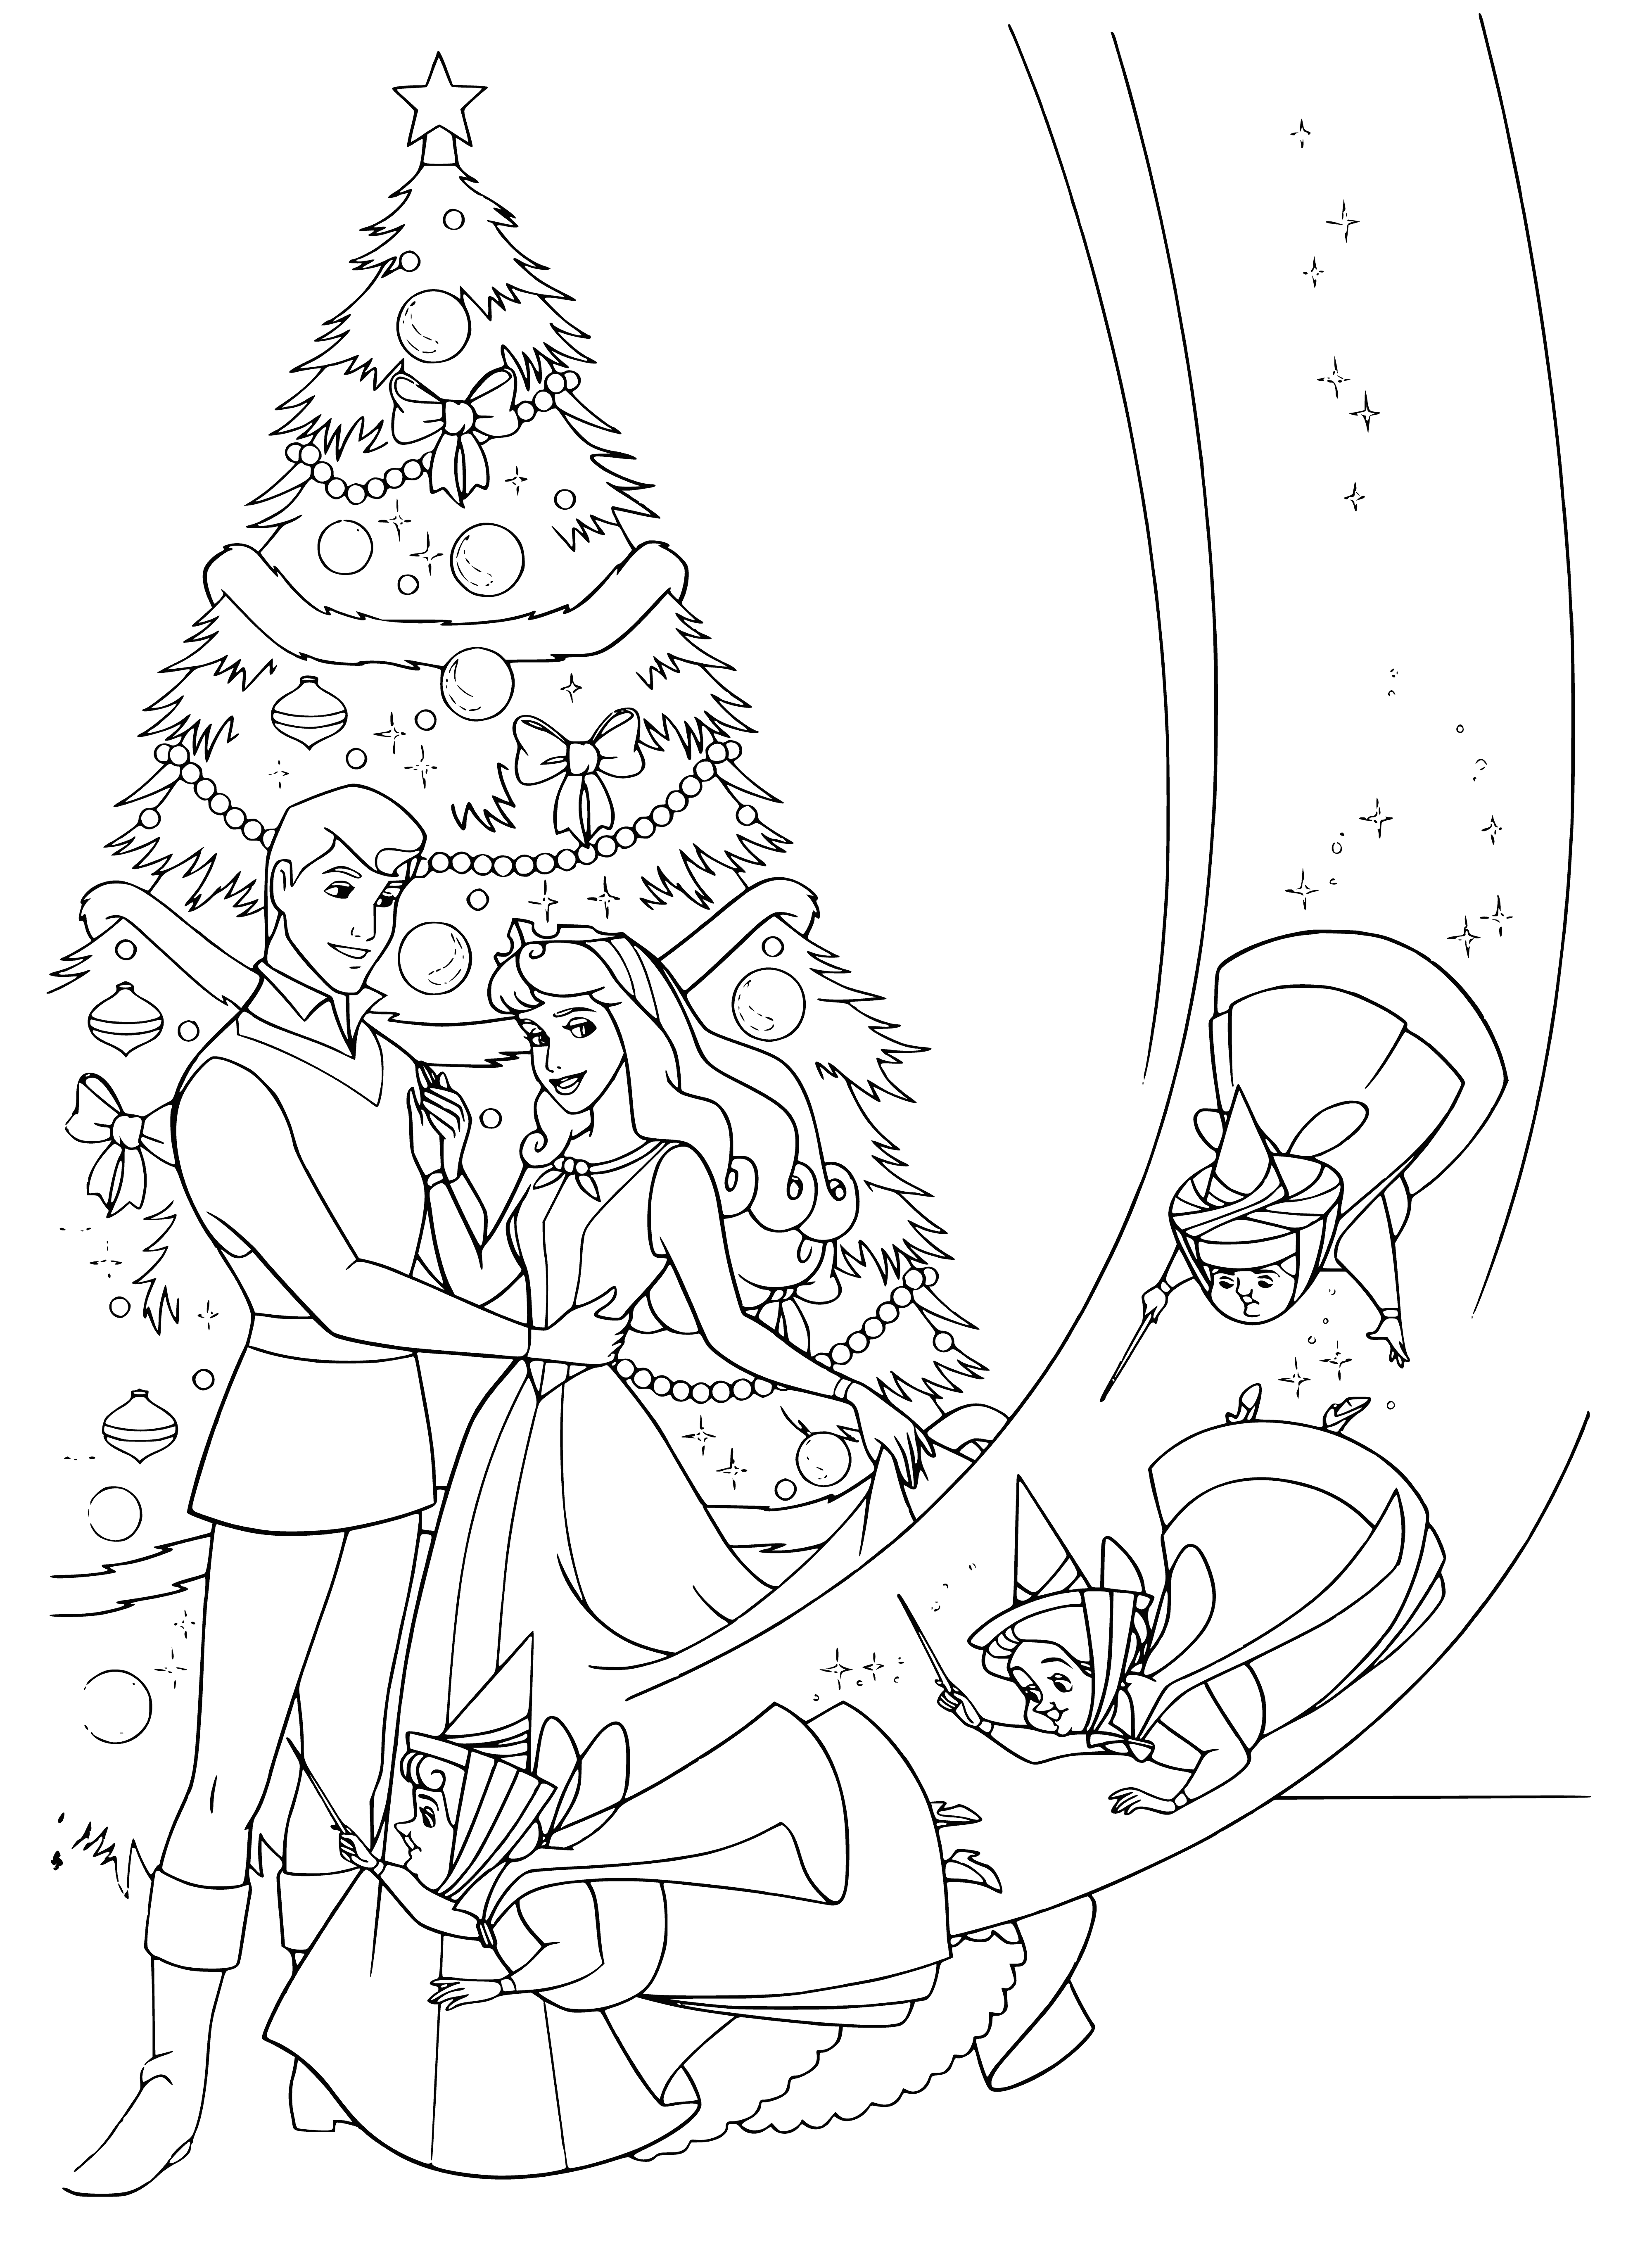 coloring page: Disney princesses are dressed up & ready to ring in the New Year with a bang! Led by Aurora, they look happy & excited to bring in new hope & possibilities.